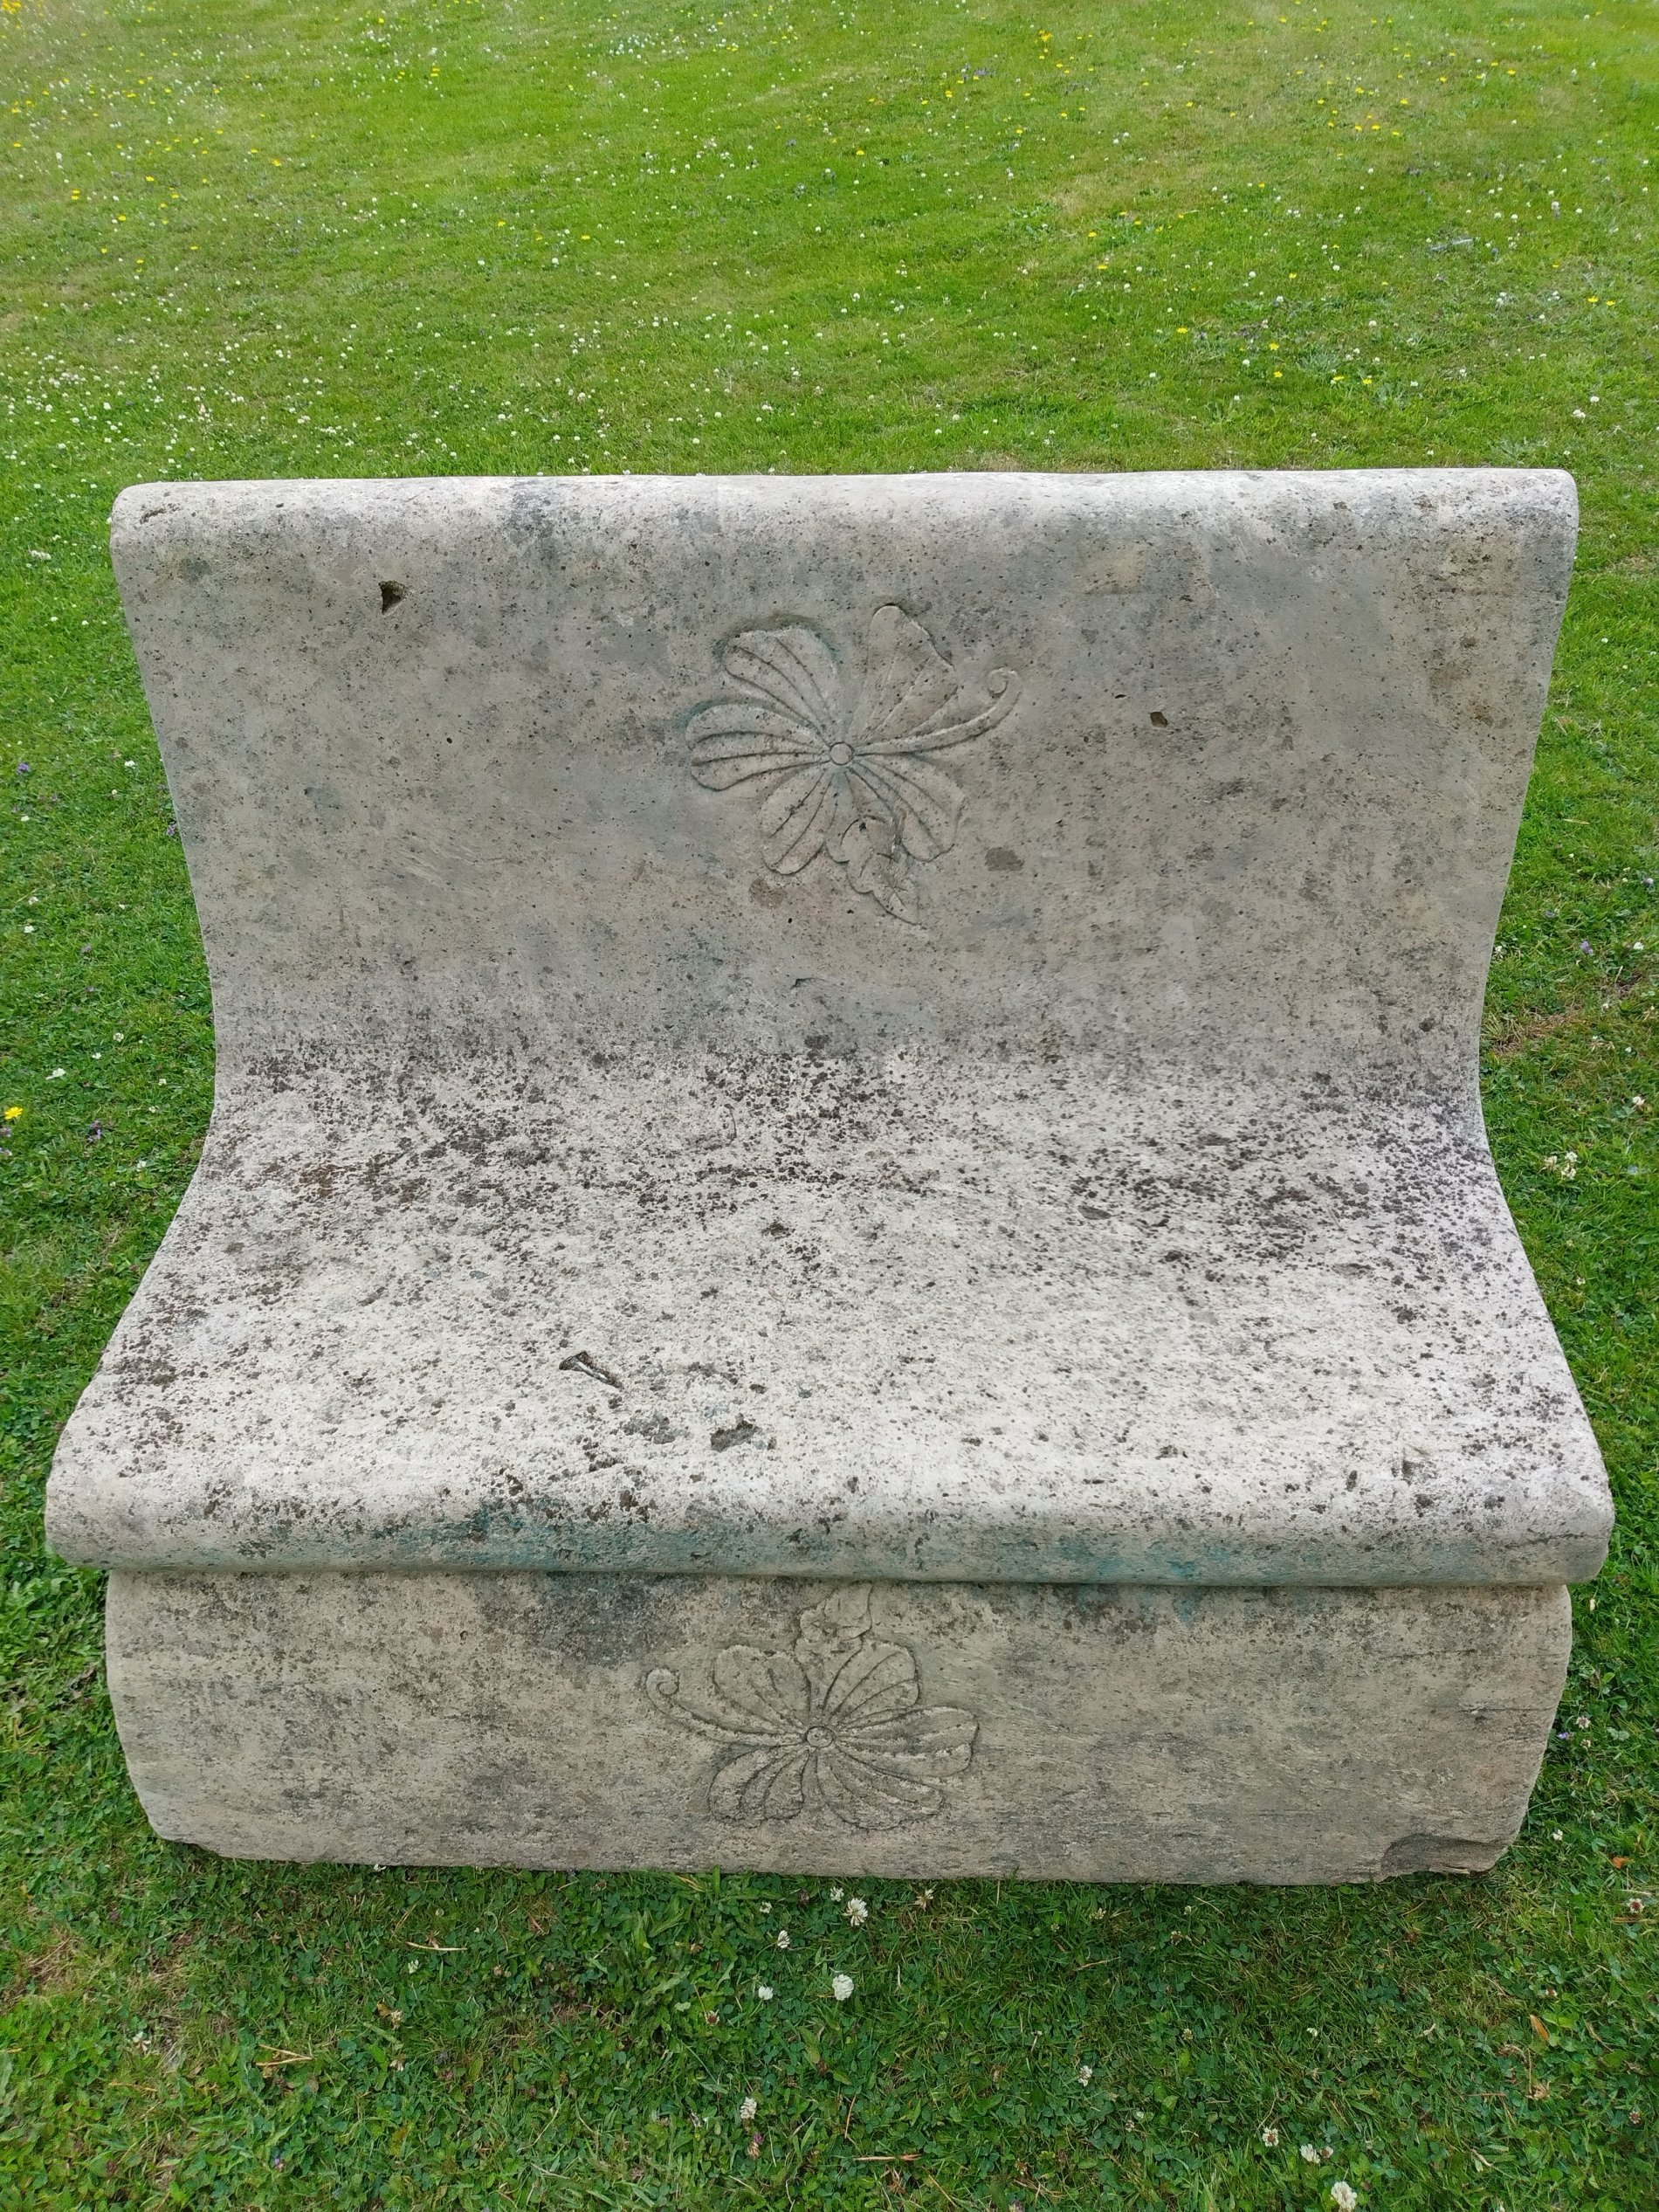 A similar unusual carved stone seat